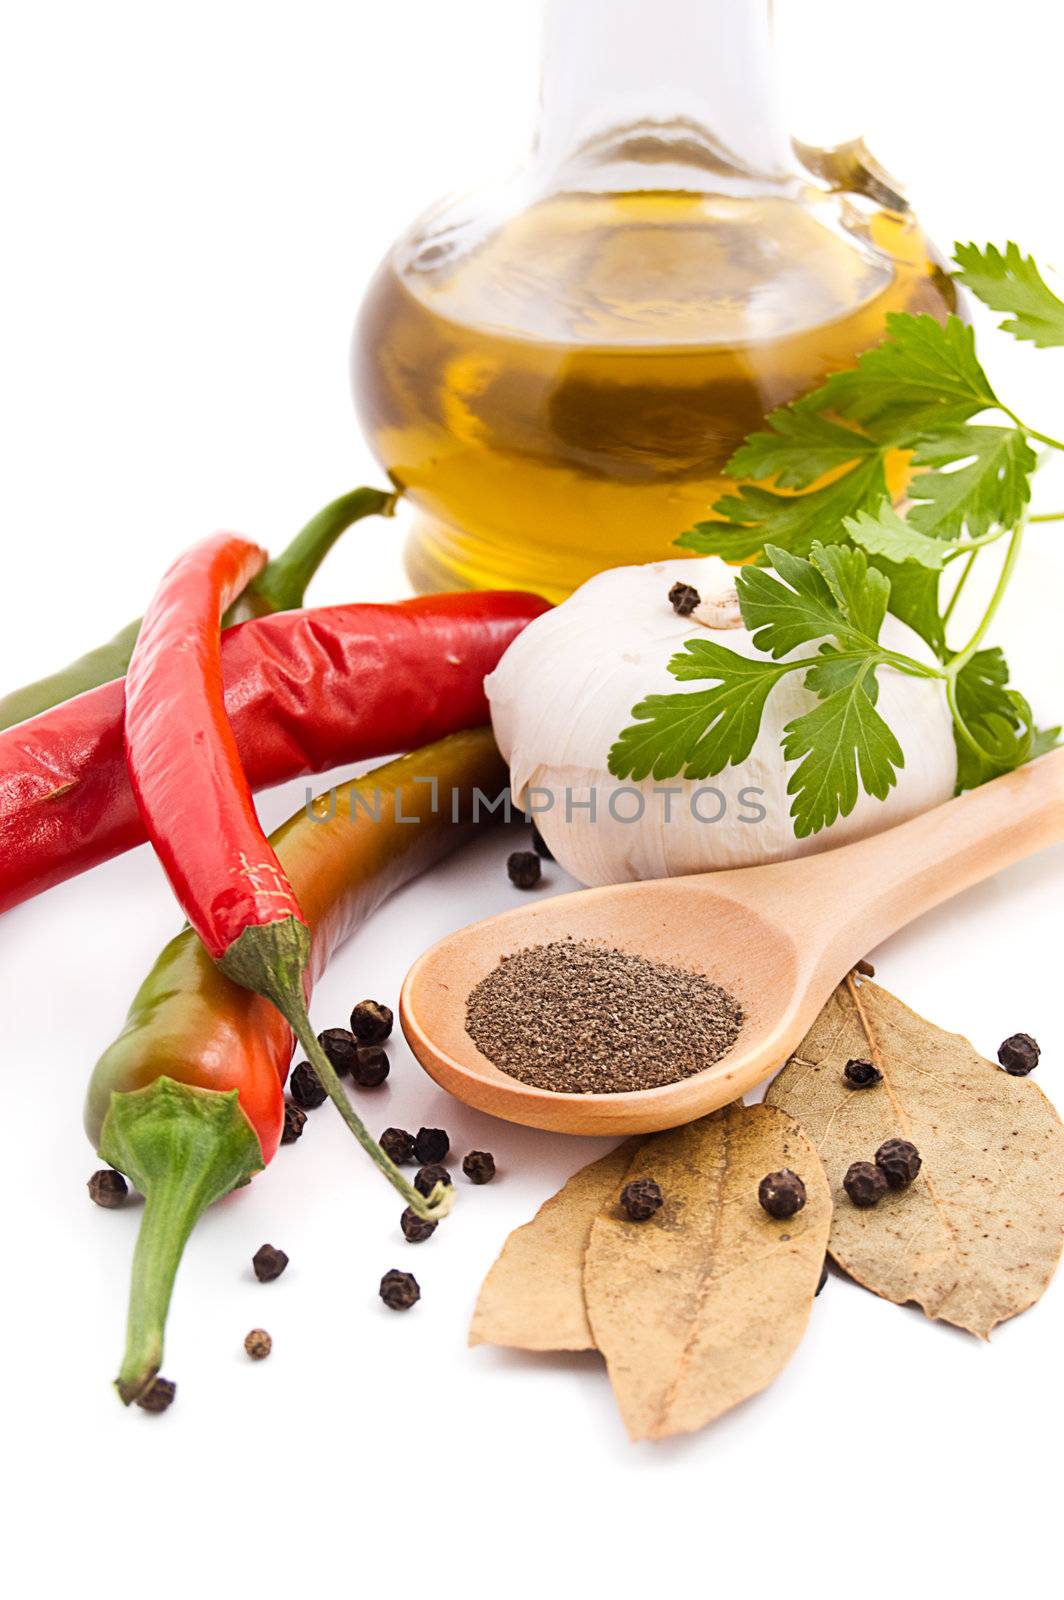 Spices and olive oil by Angel_a